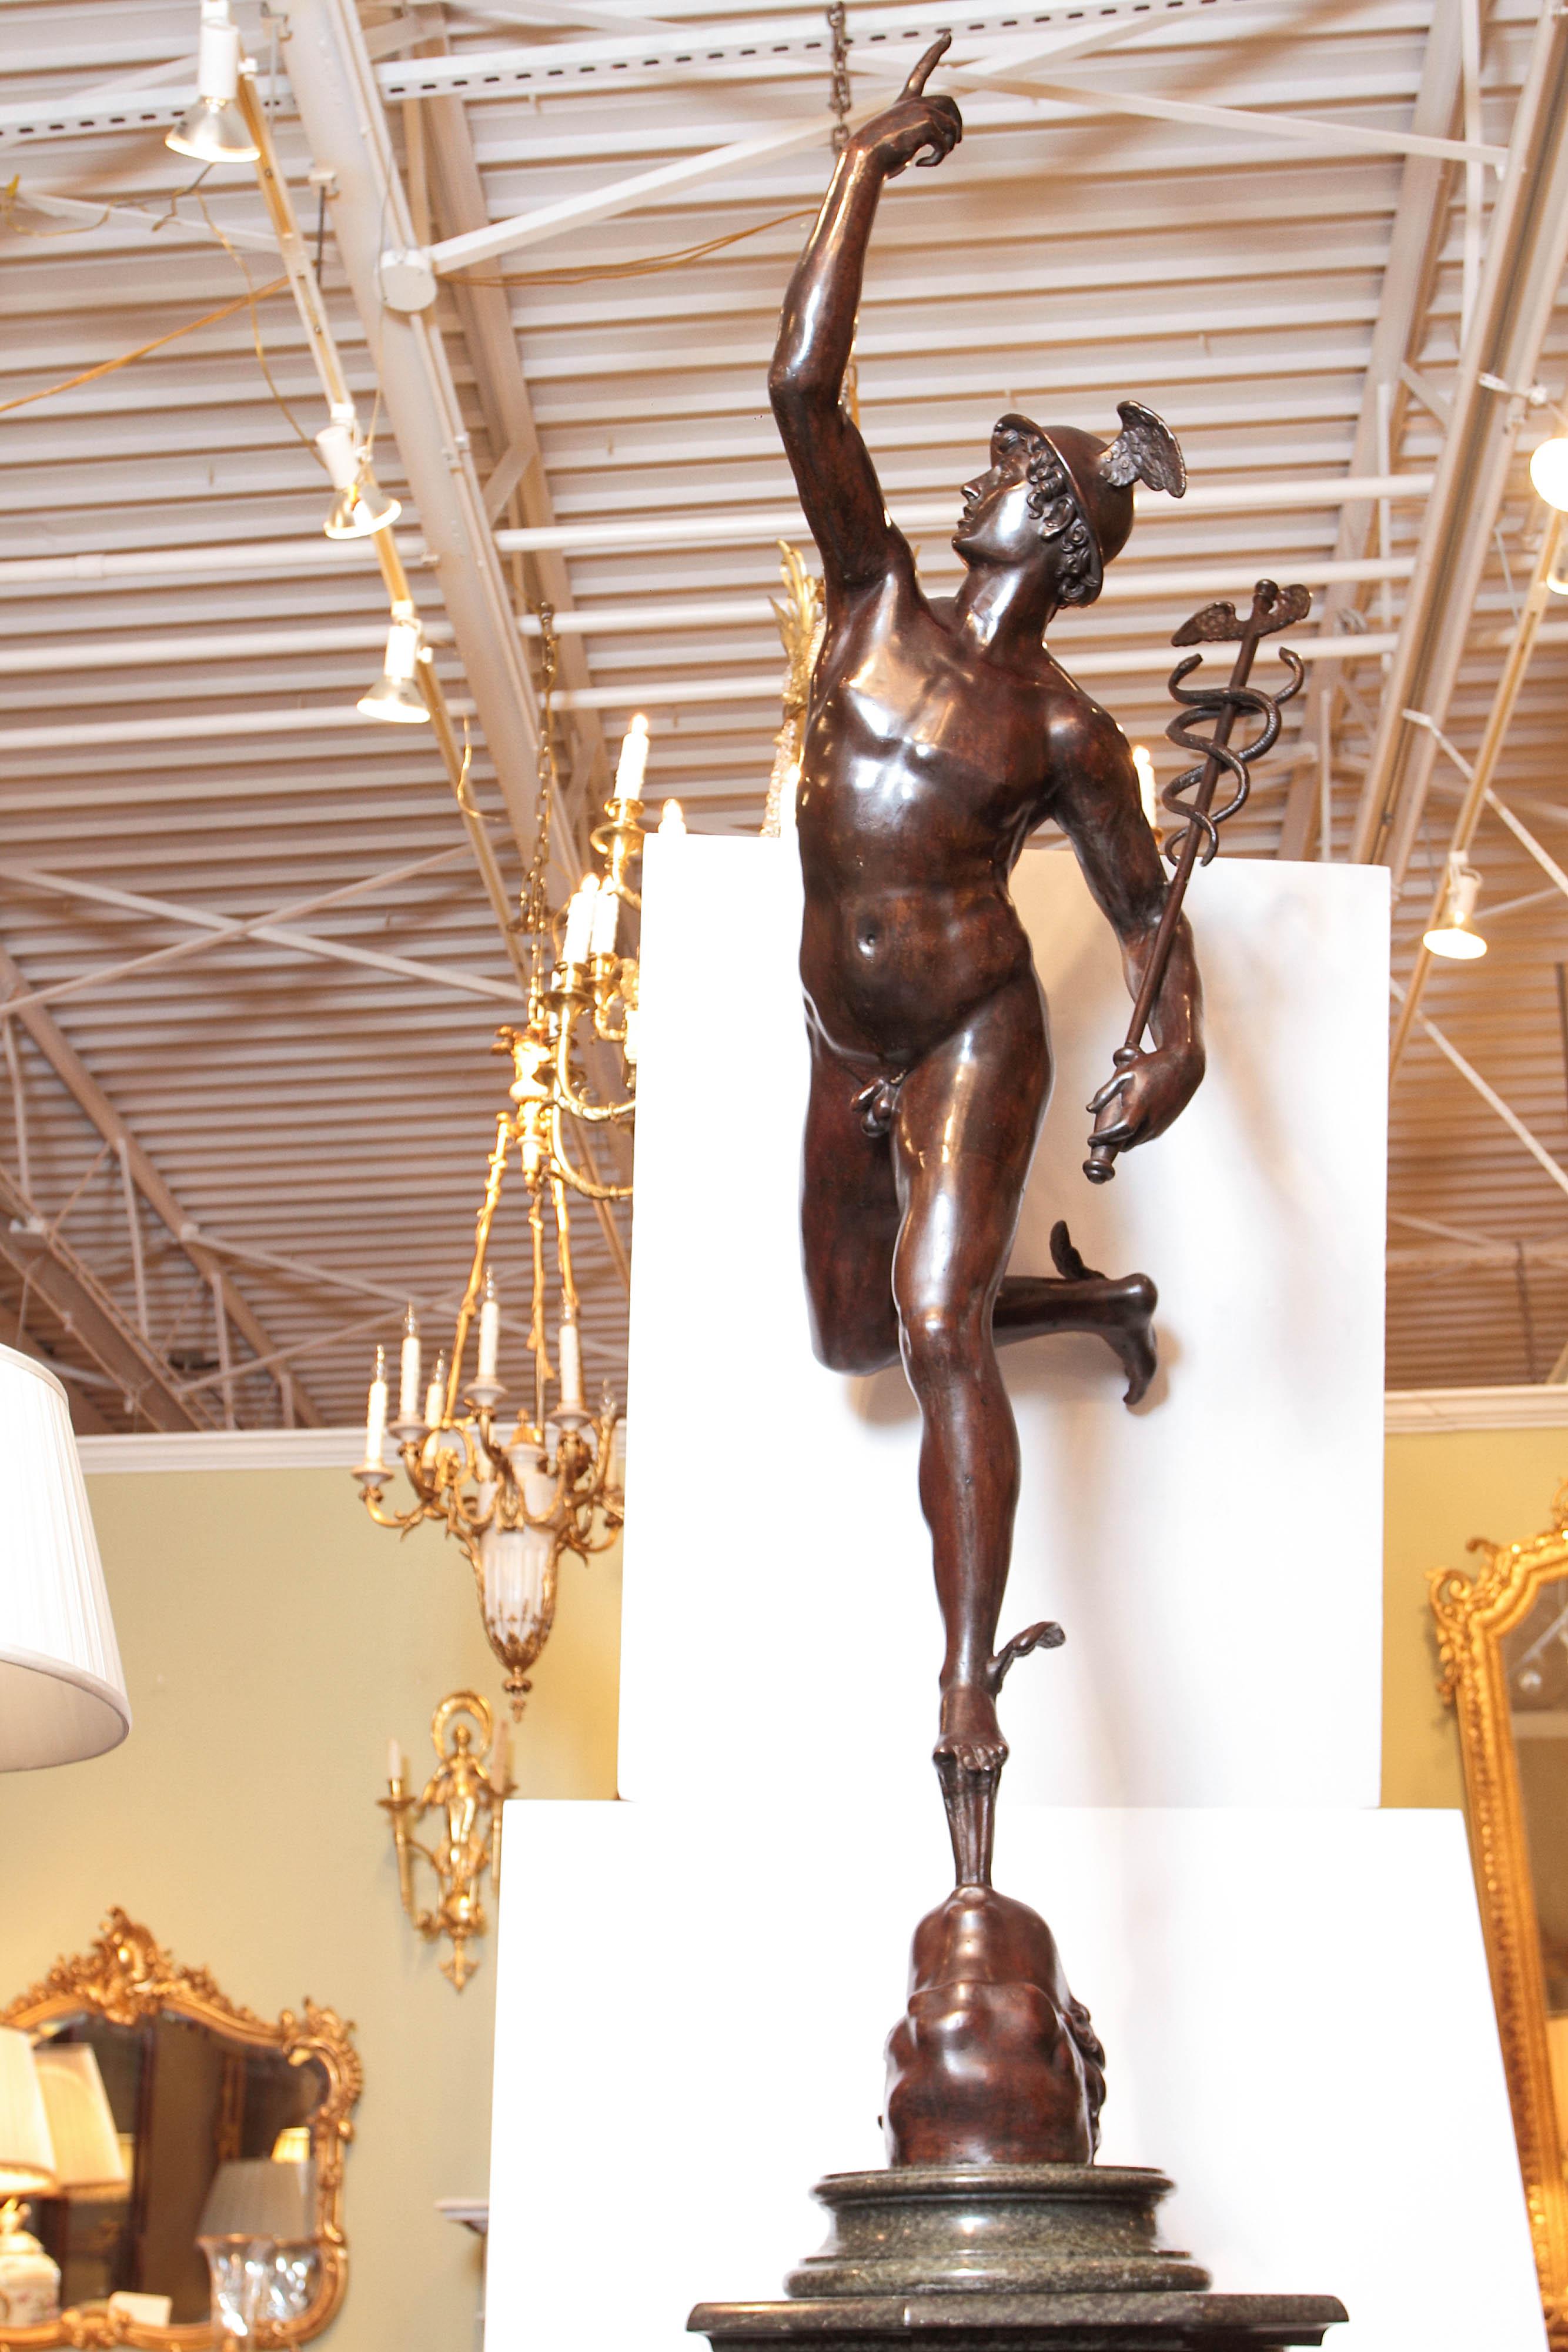 A beautiful 19th century Italian patinated bronze figure of Mercury after the model by Giambologna. Resting on a marble pedestal